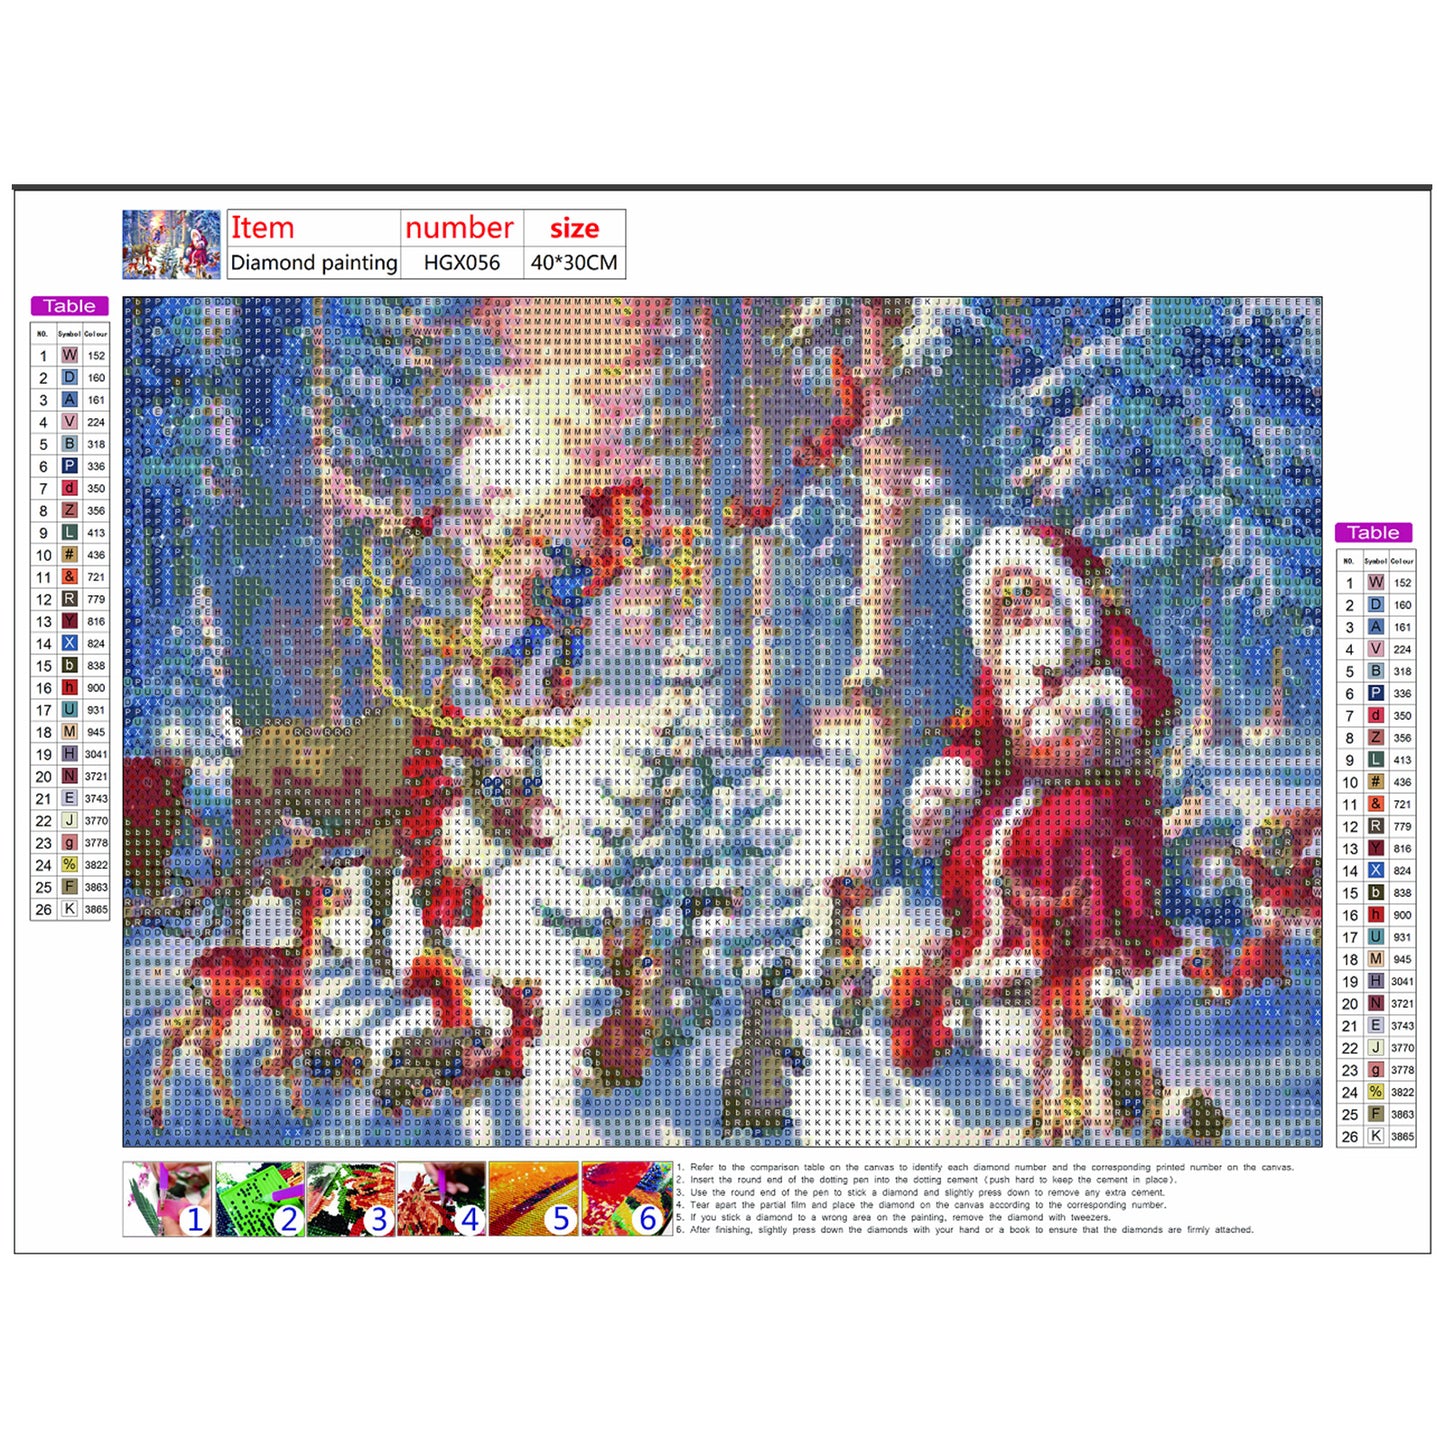 4 Sets Christmas Snowman 5D Full Drill Diamond Painting Embroidery for Cross Stitch Kits DIY for Rhinestone Crystal Home Decoration